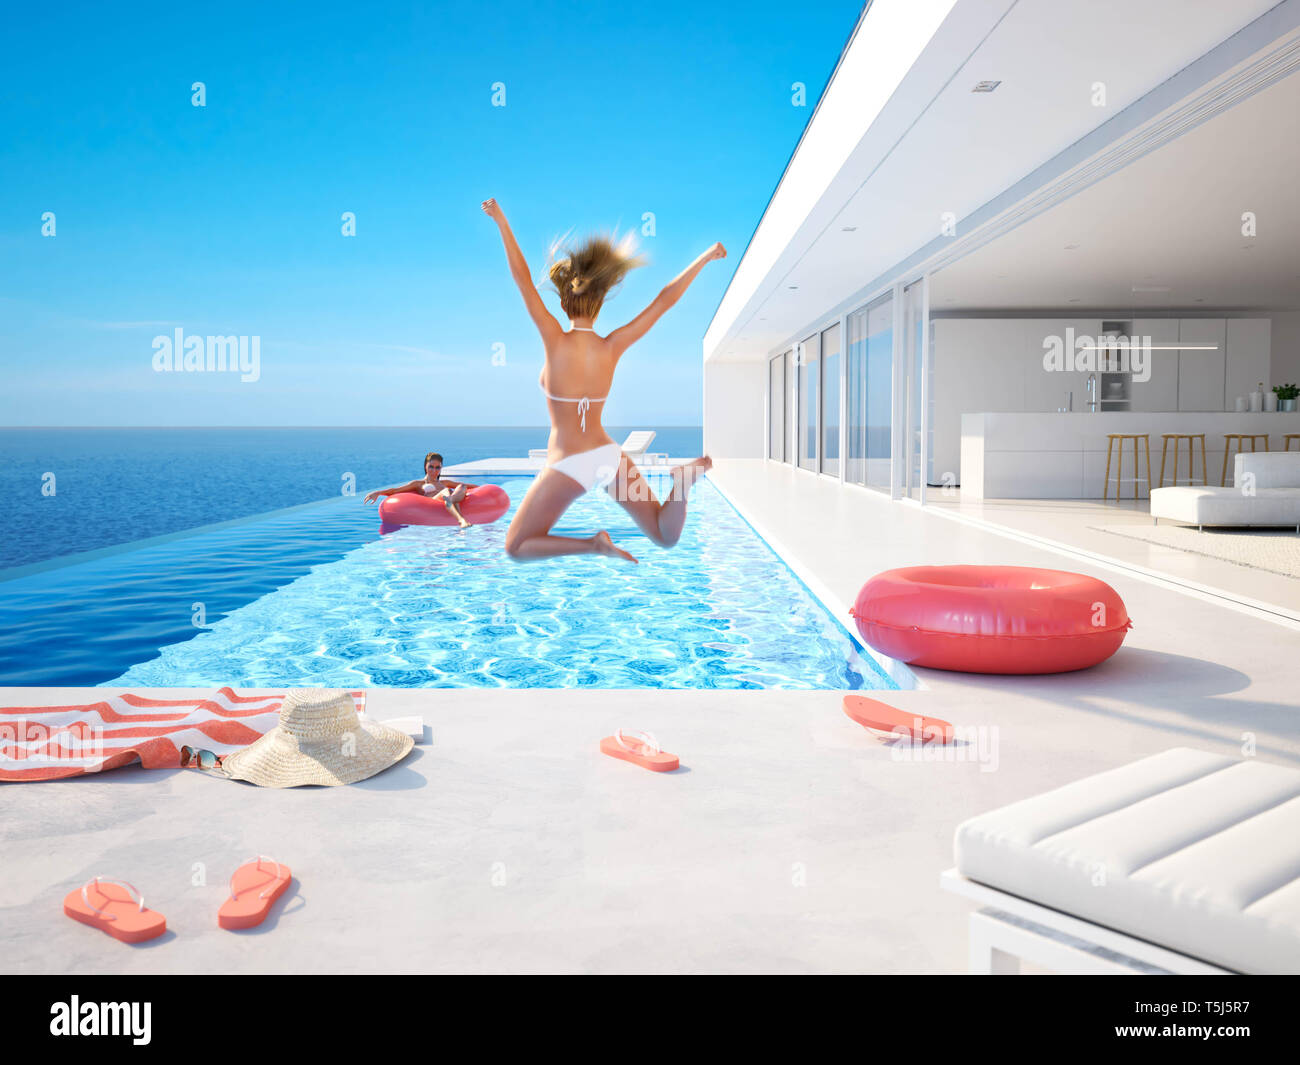 3D-Illustration. woman jumping in the pool. summer fun Stock Photo